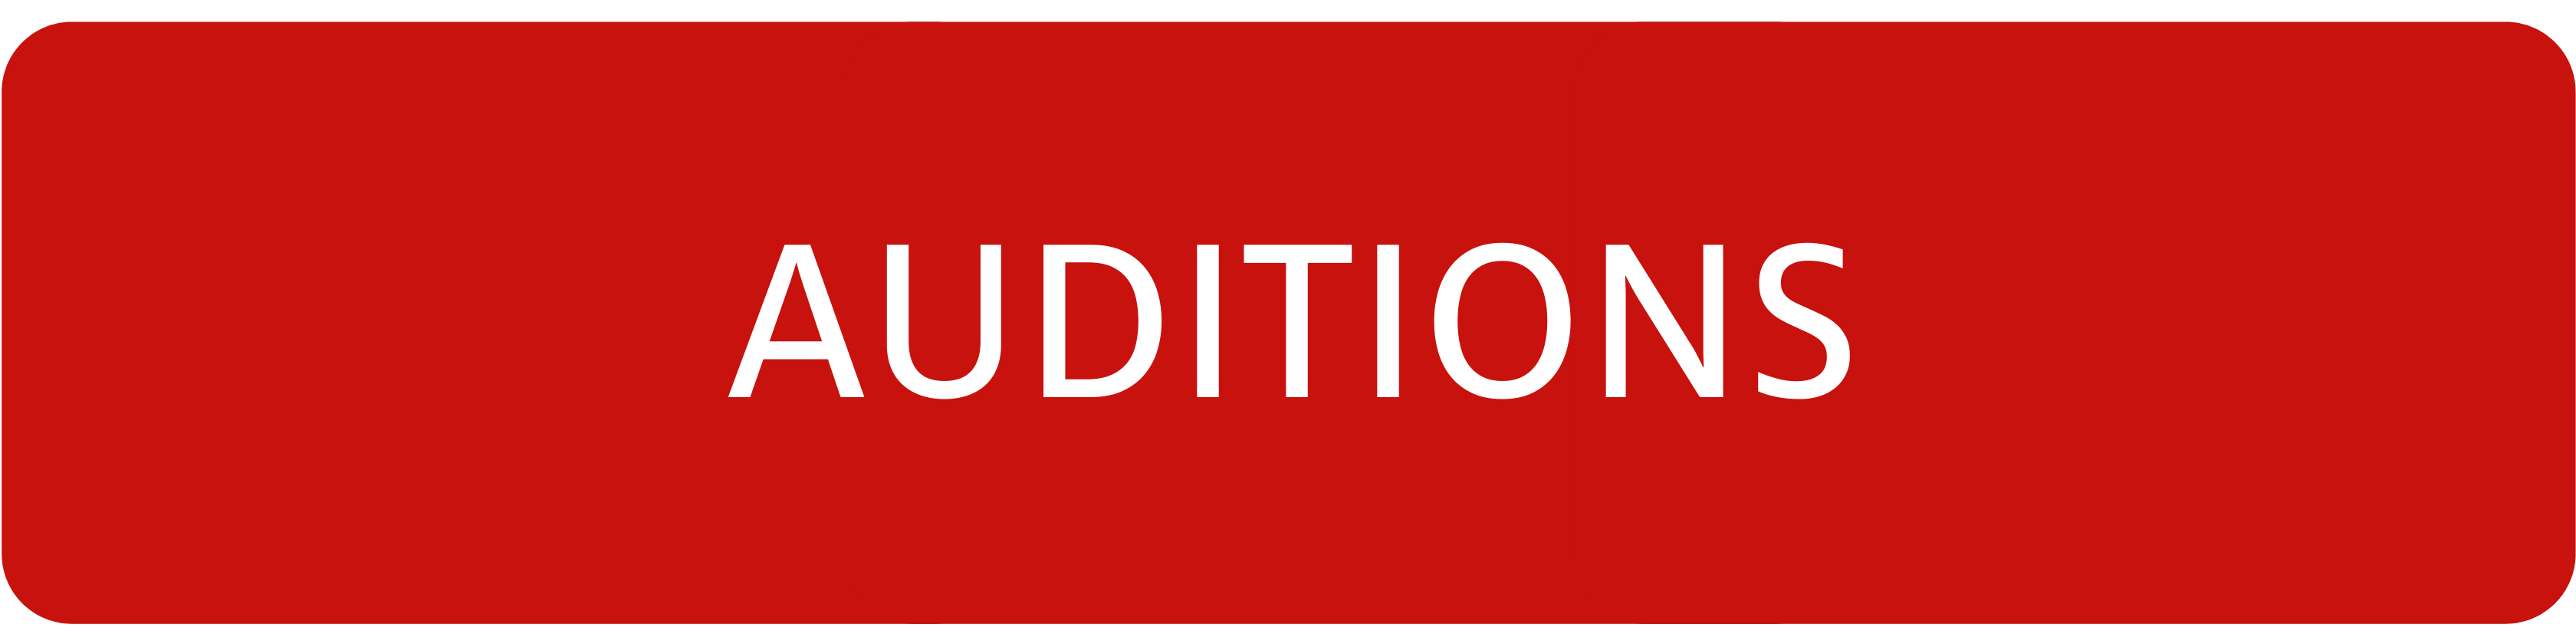 auditions-button-graphics-4.png